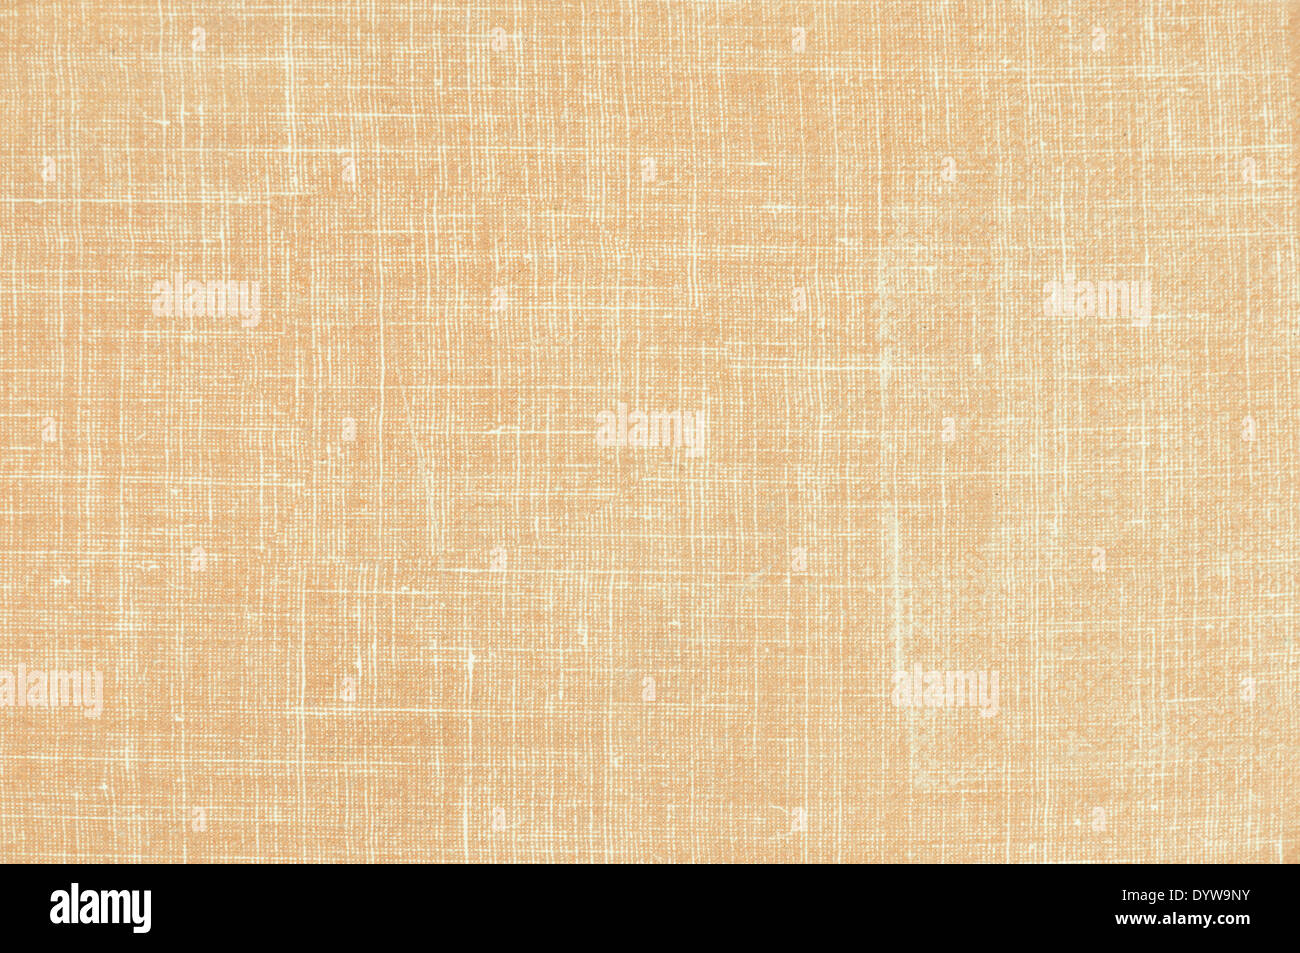 background of old brown fabric Stock Photo